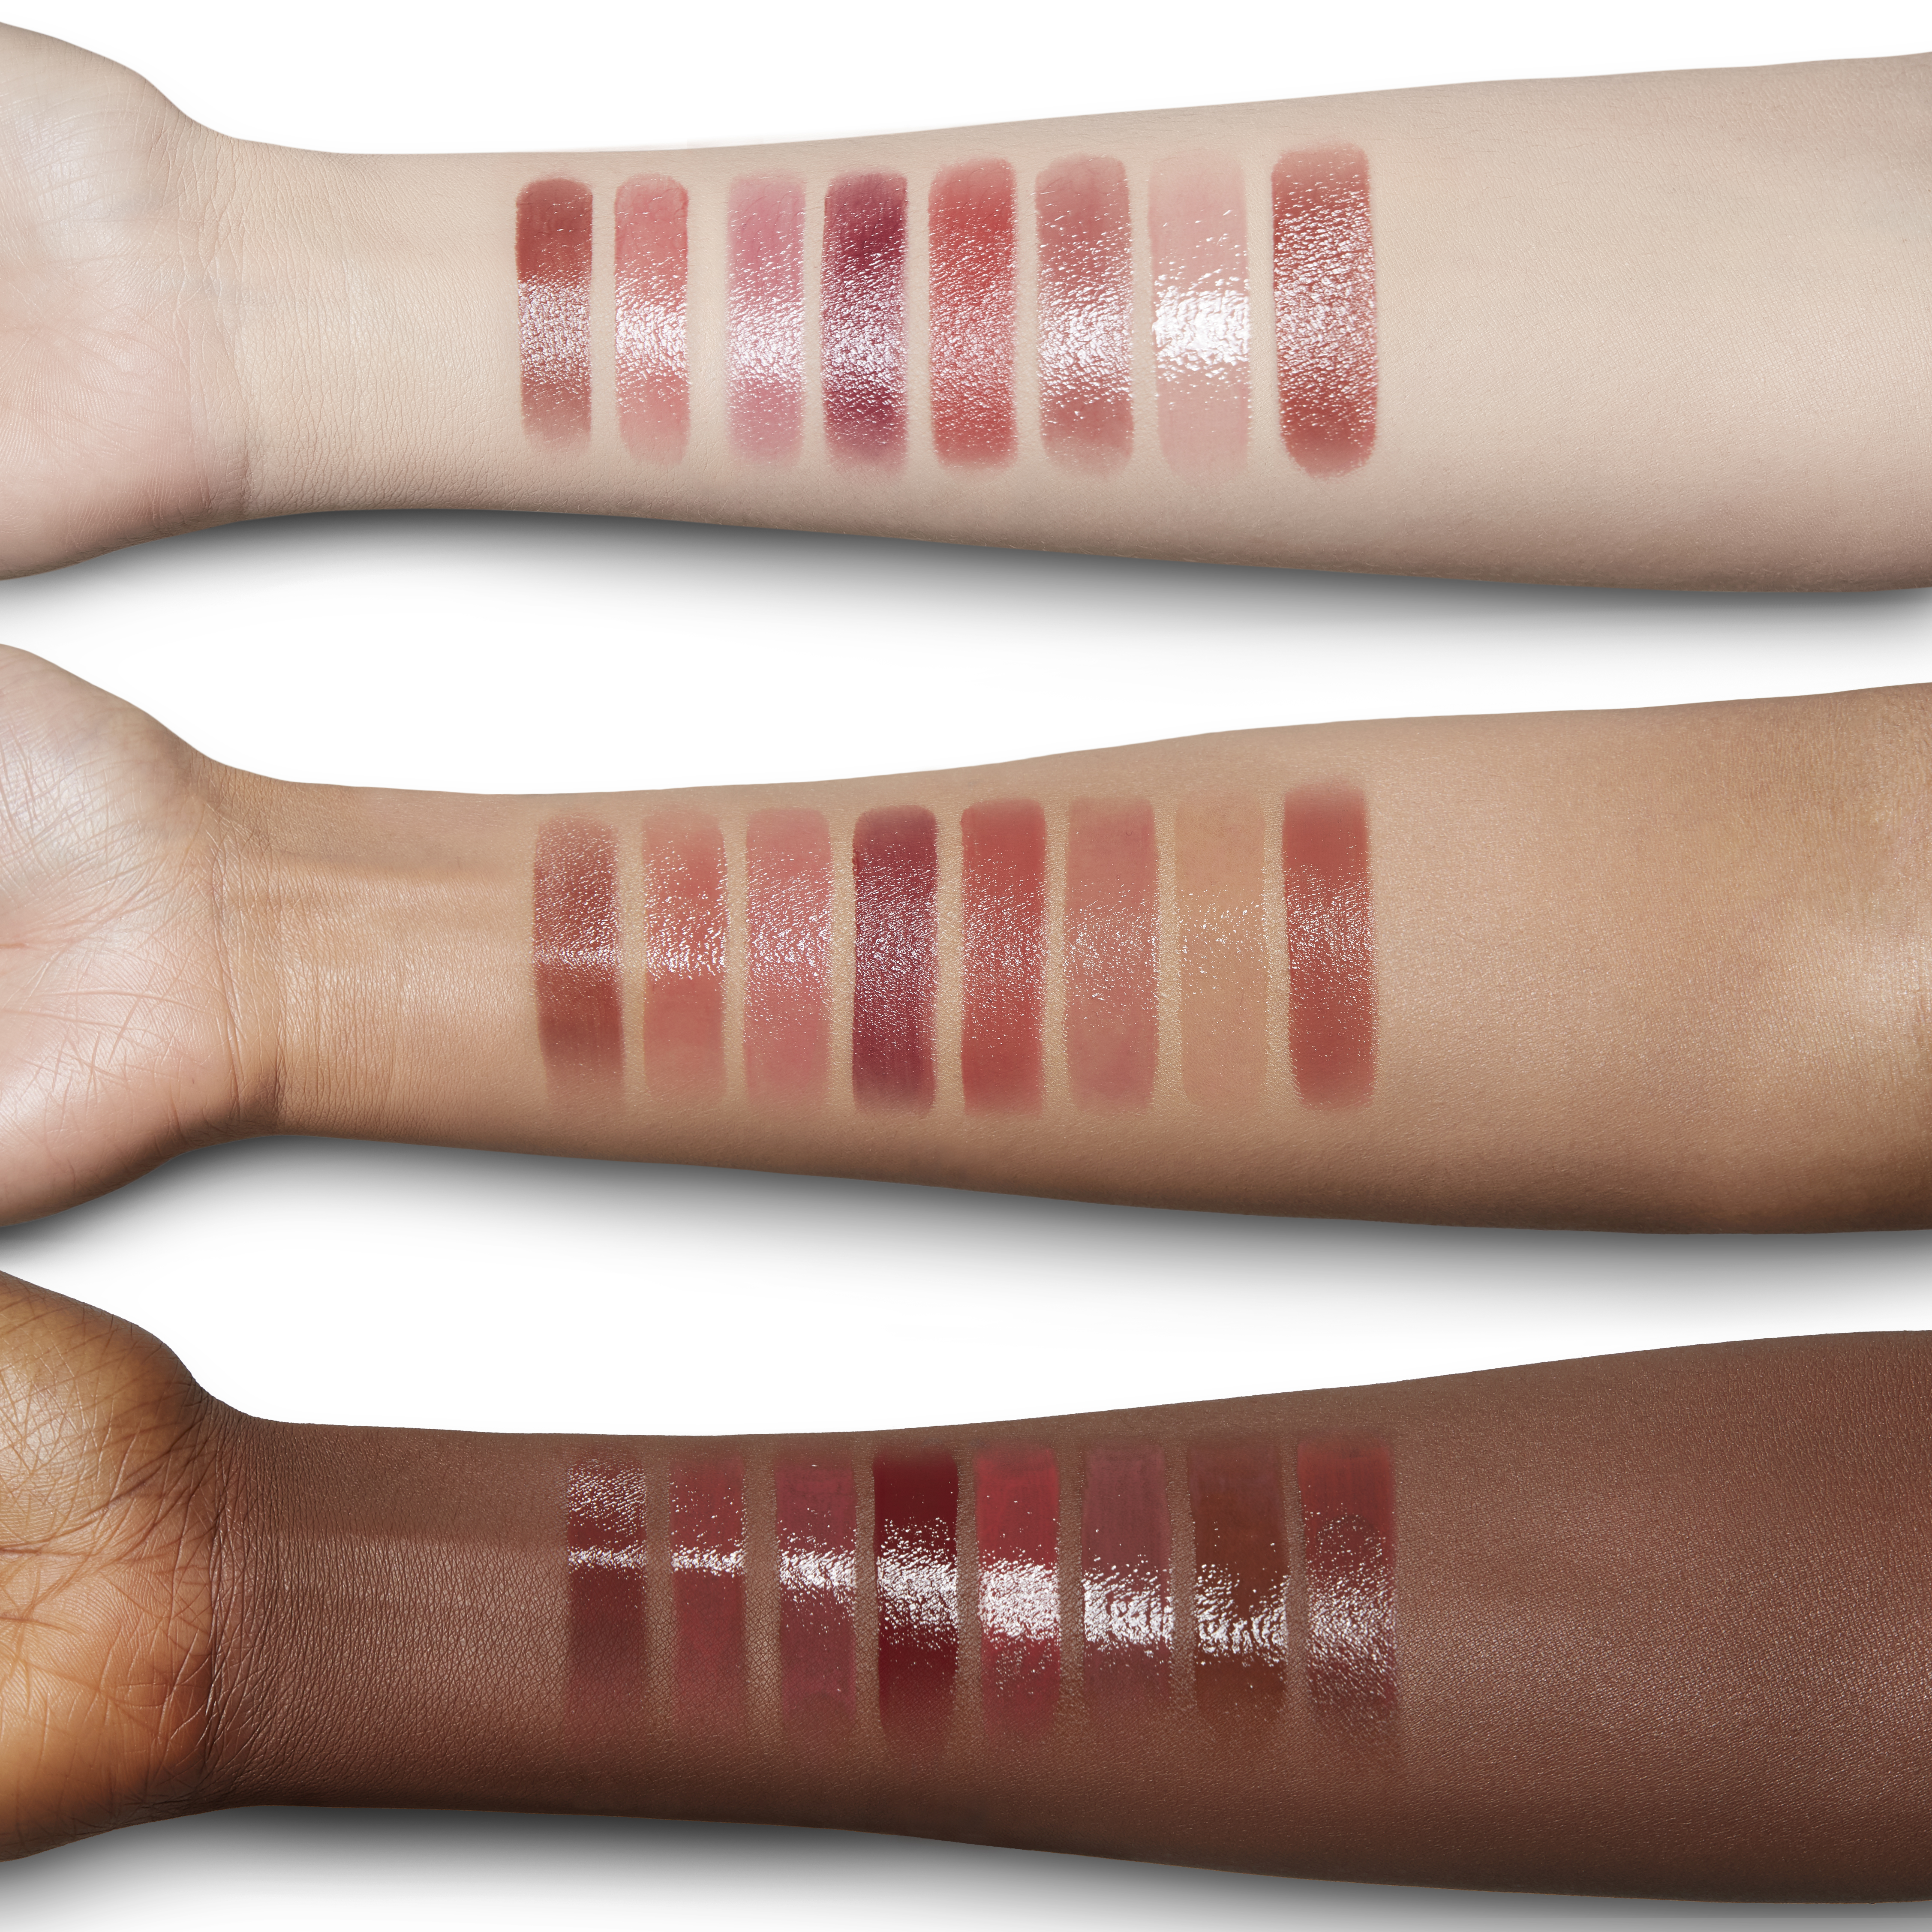 HAPPIKISS ARM SWATCHES